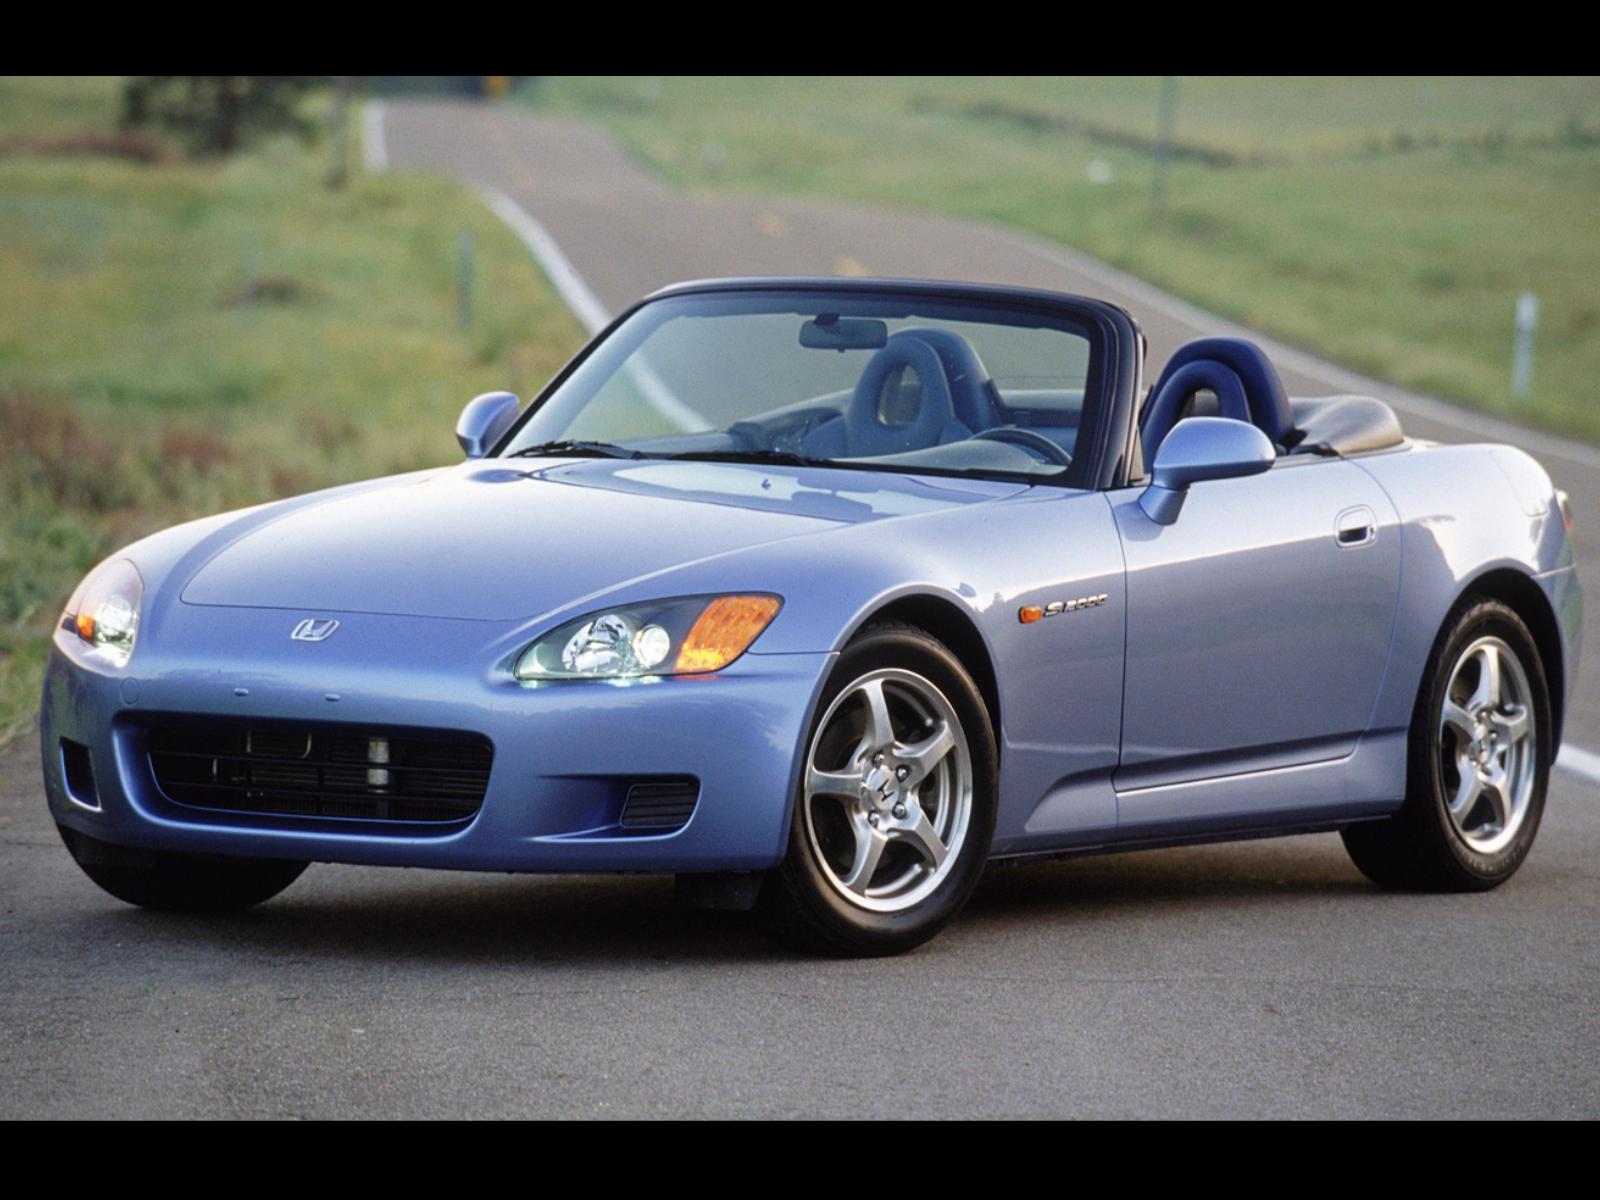 Honda s2000 picture gallery #3